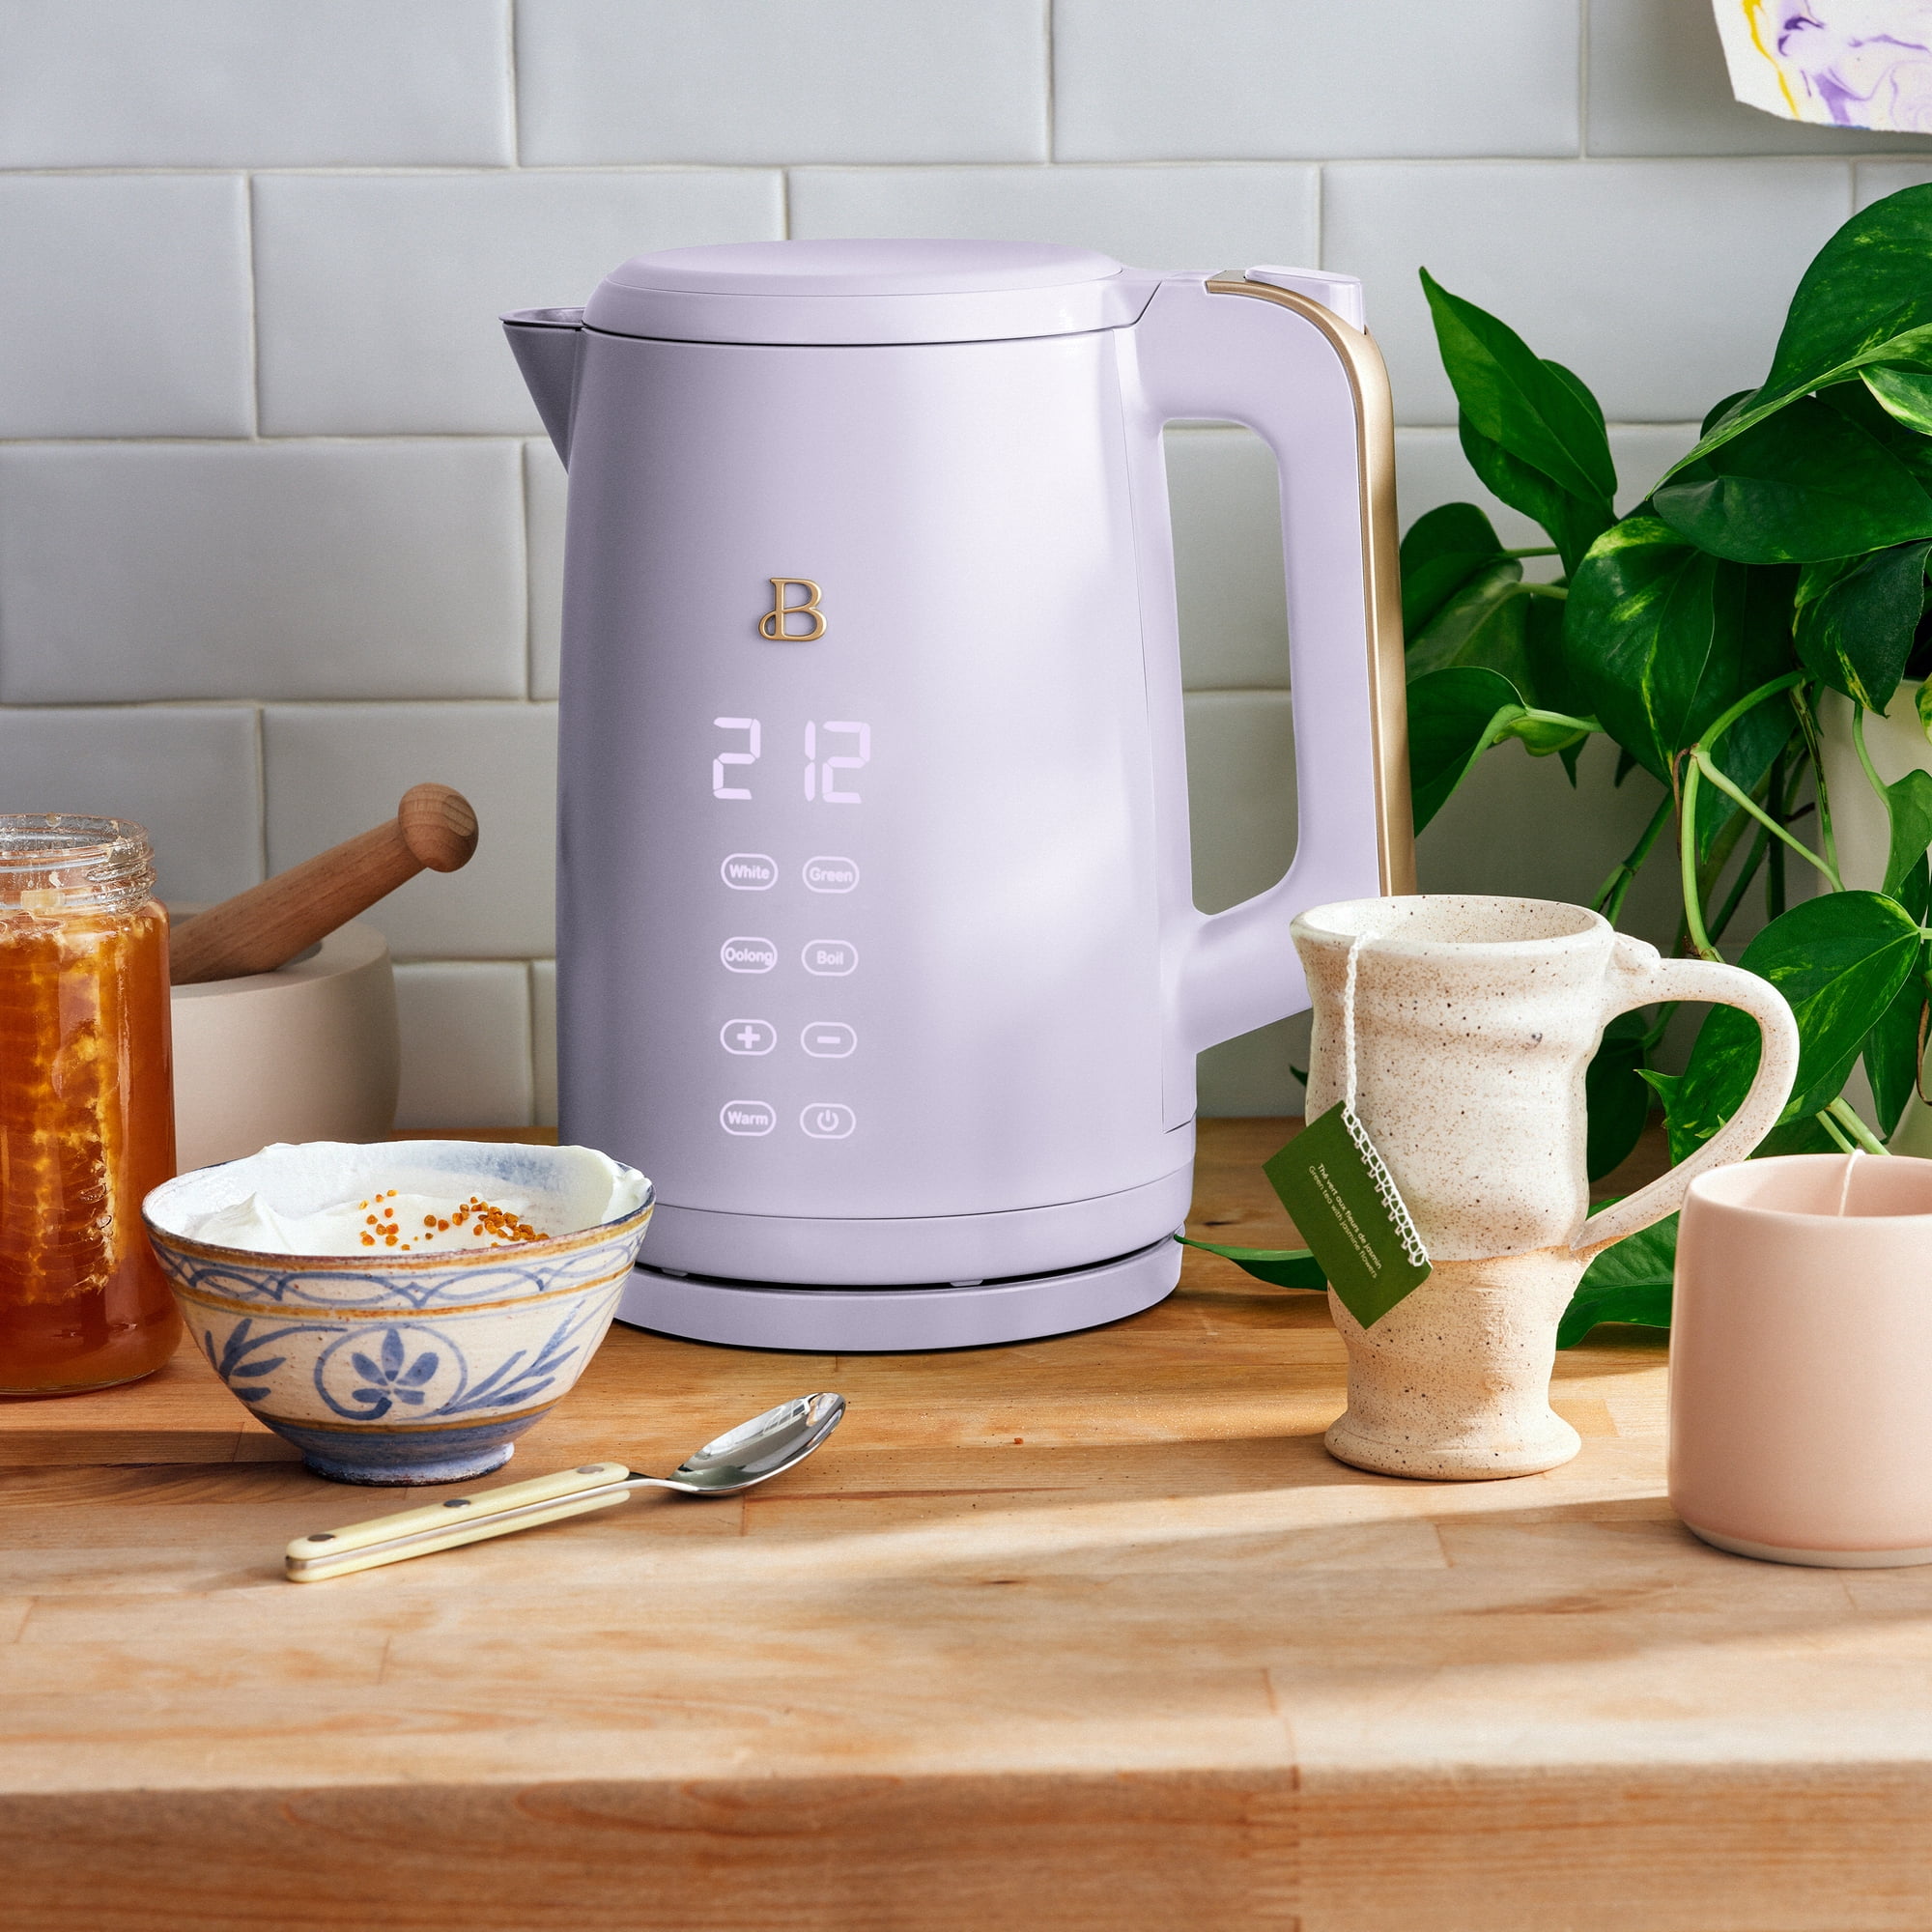 Beautiful 1.7-Liter Electric Kettle 1500 W with One-Touch Activation, Black  Sesame by Drew Barrymore